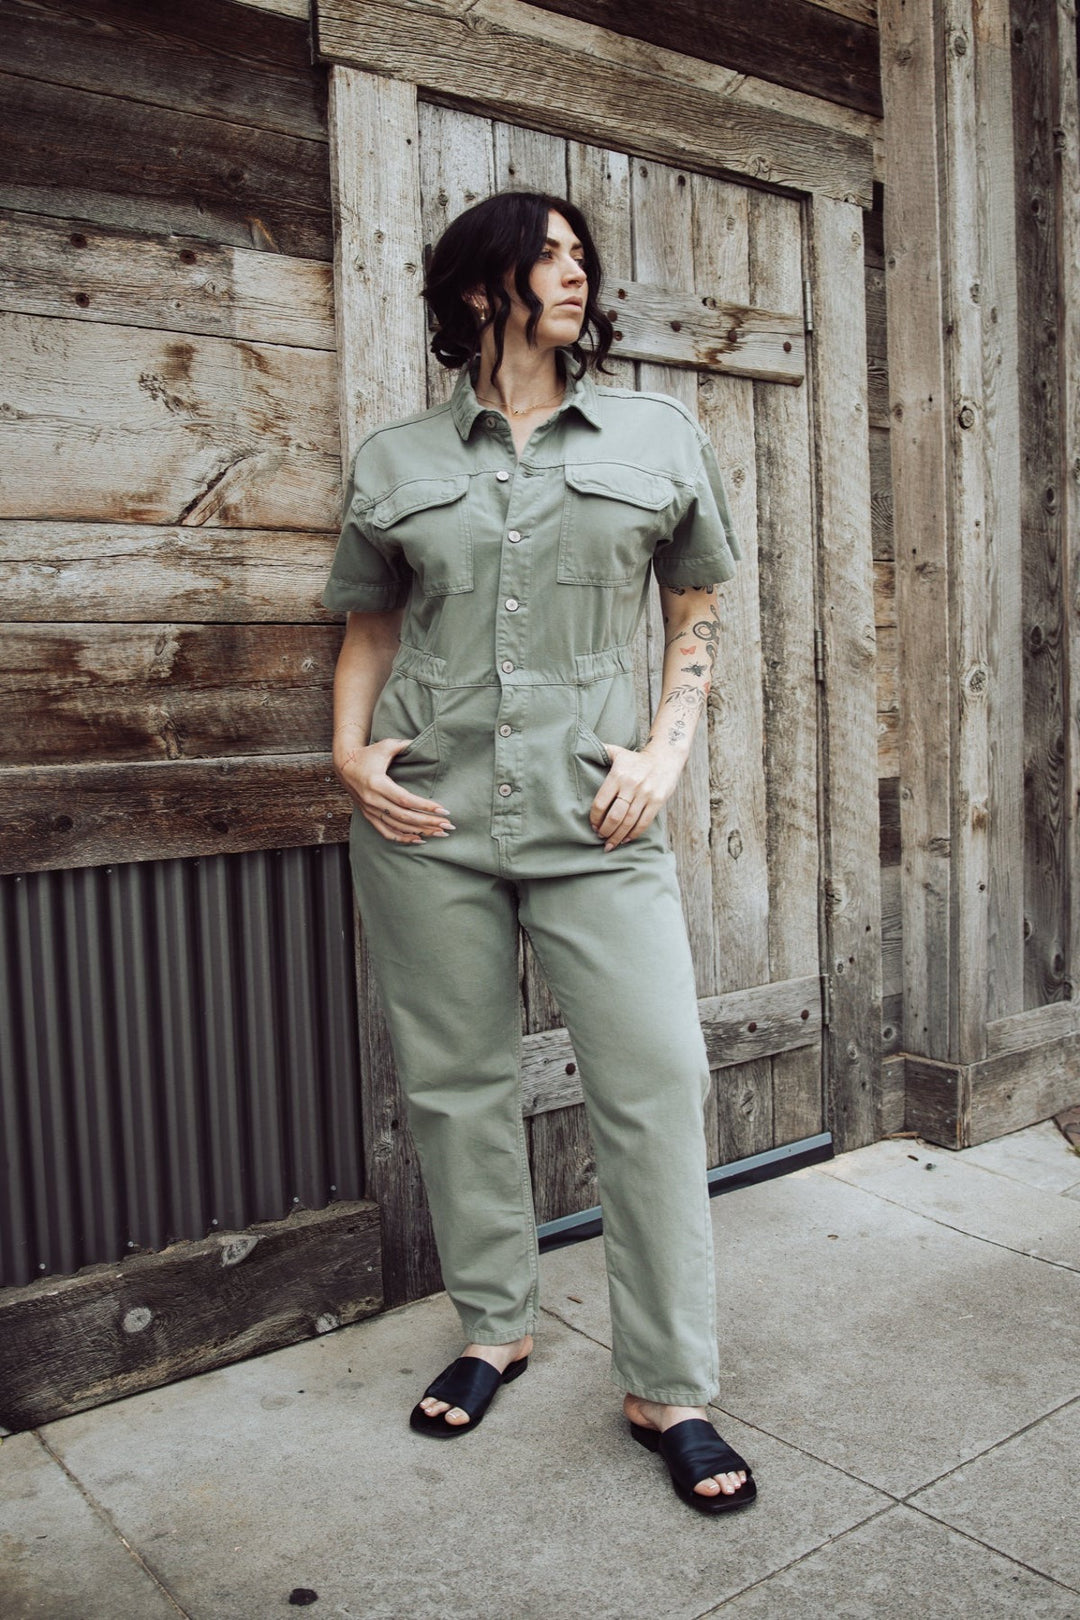 FREE PEOPLE MARCI DENIM JUMPSUIT - WASHED ARMY